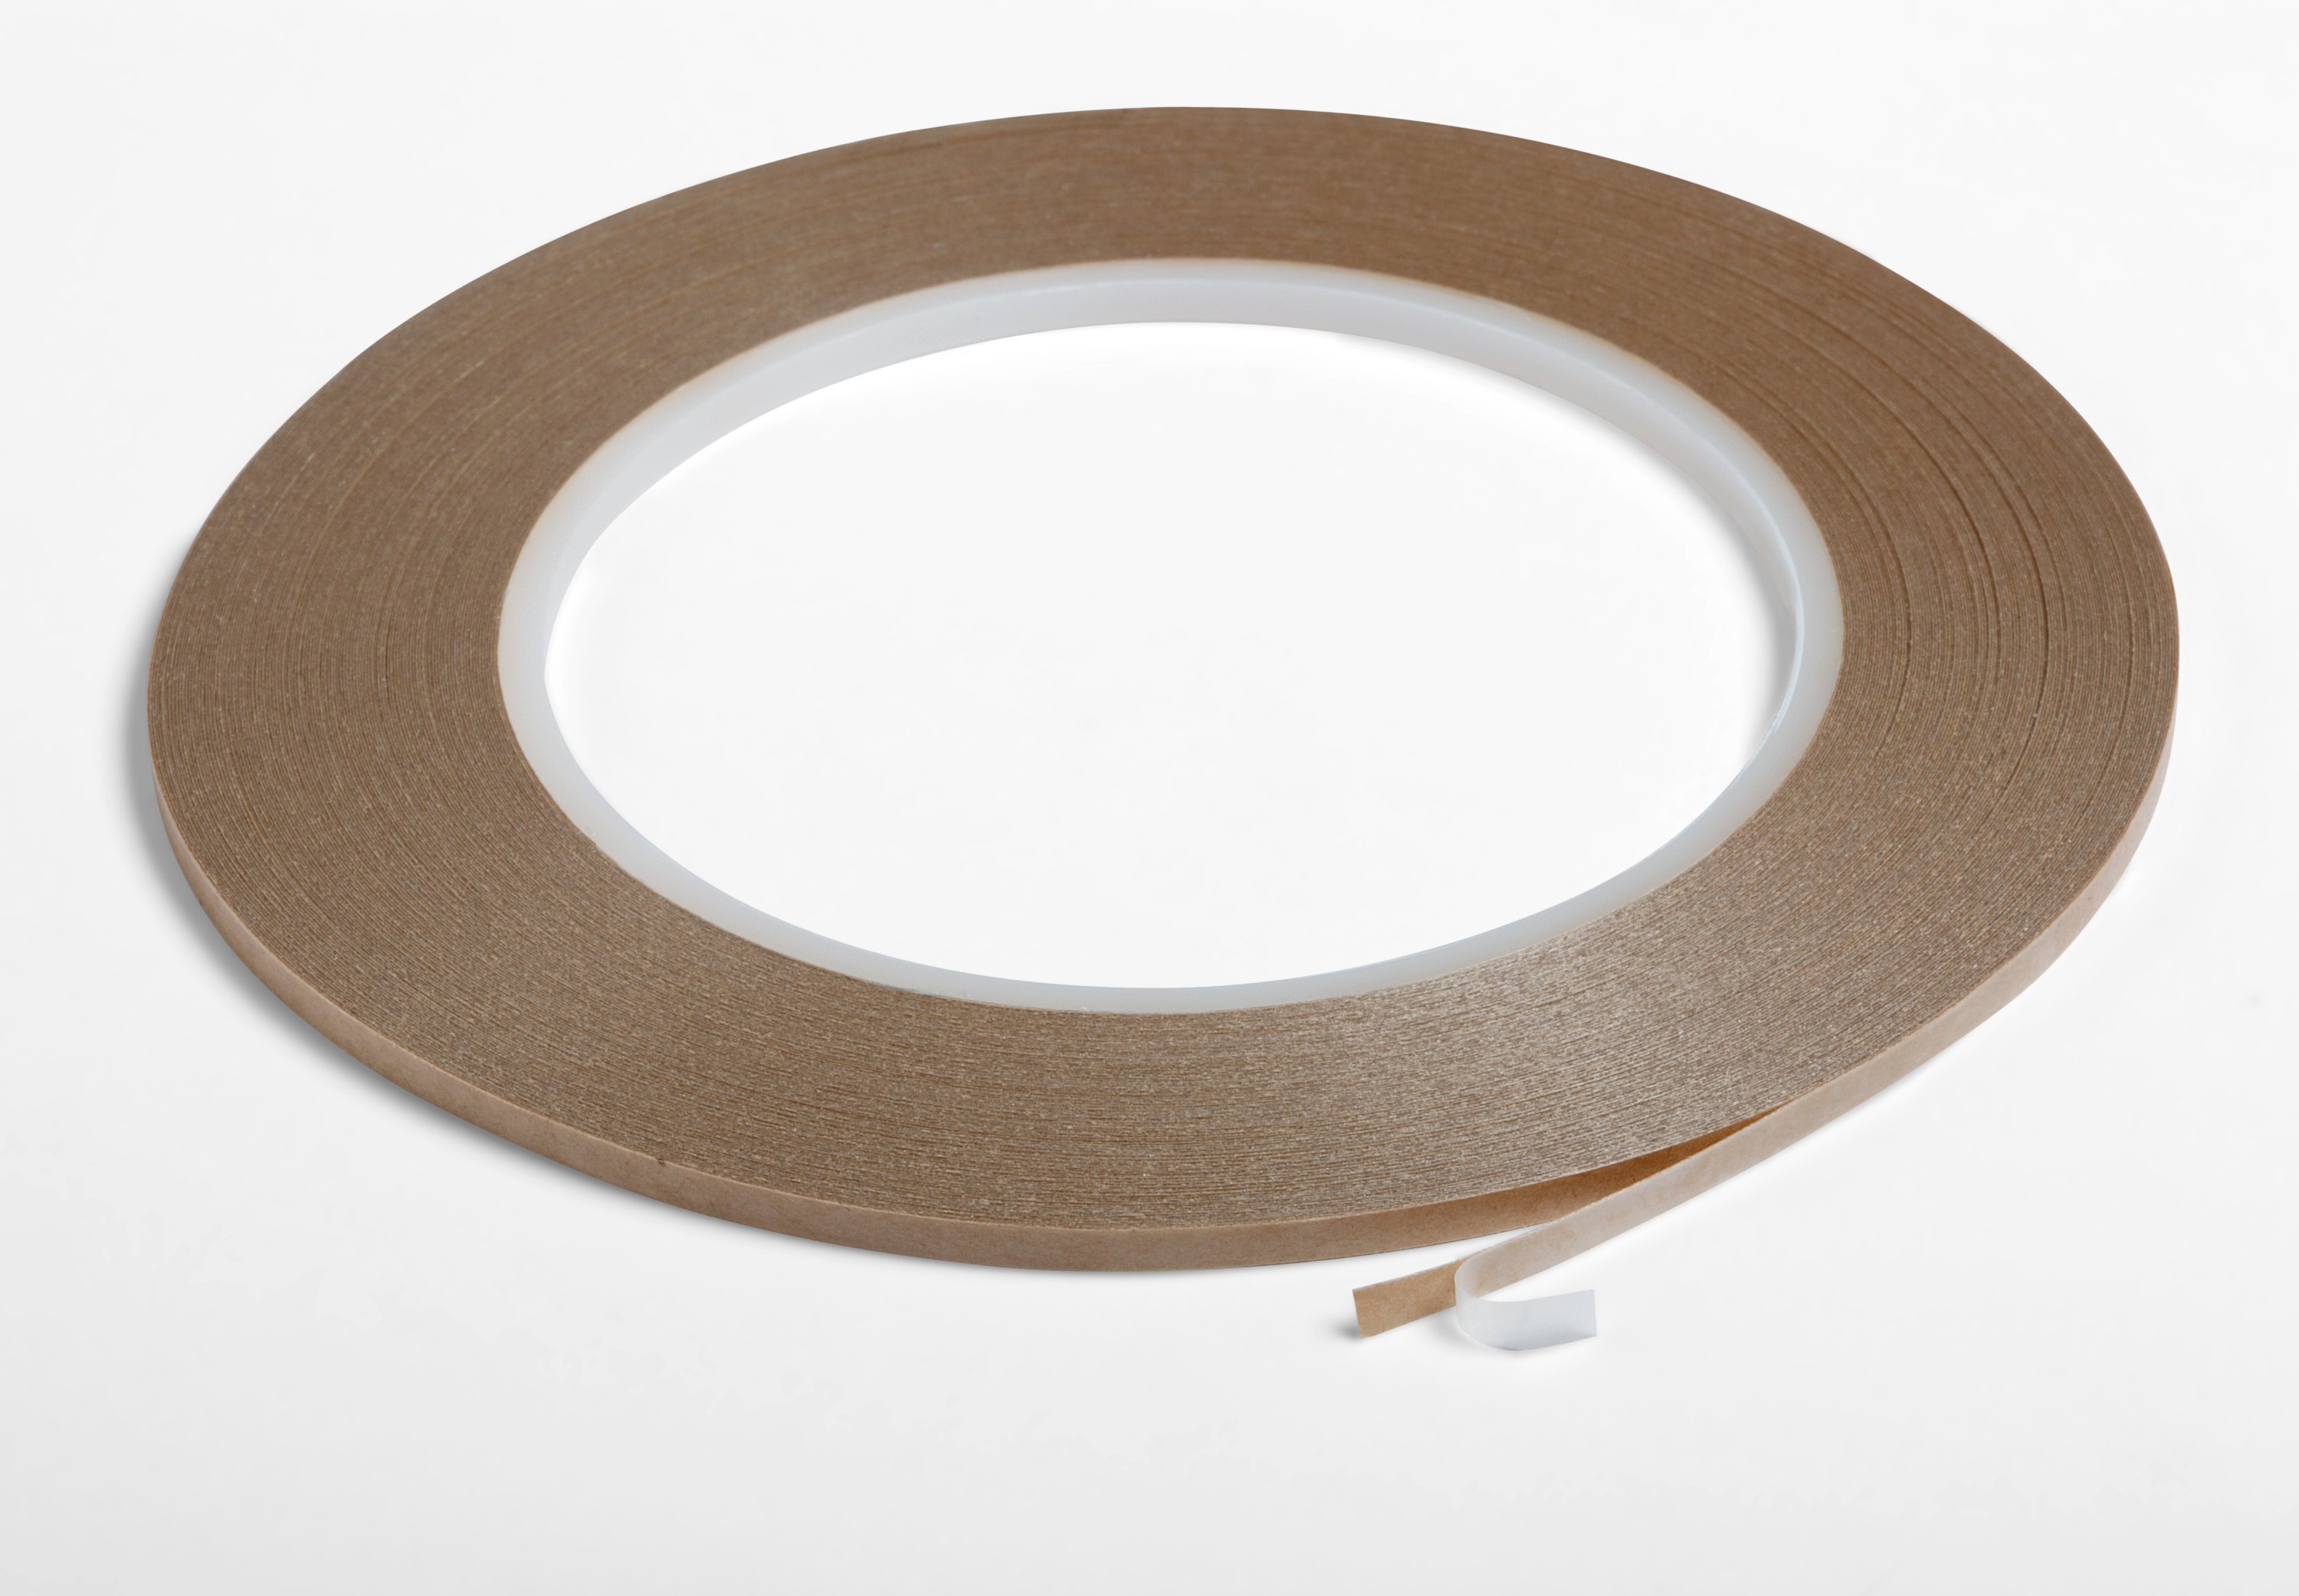 3M Electrically conductive adhesive tape 7303, 2.5 mm x 35 m